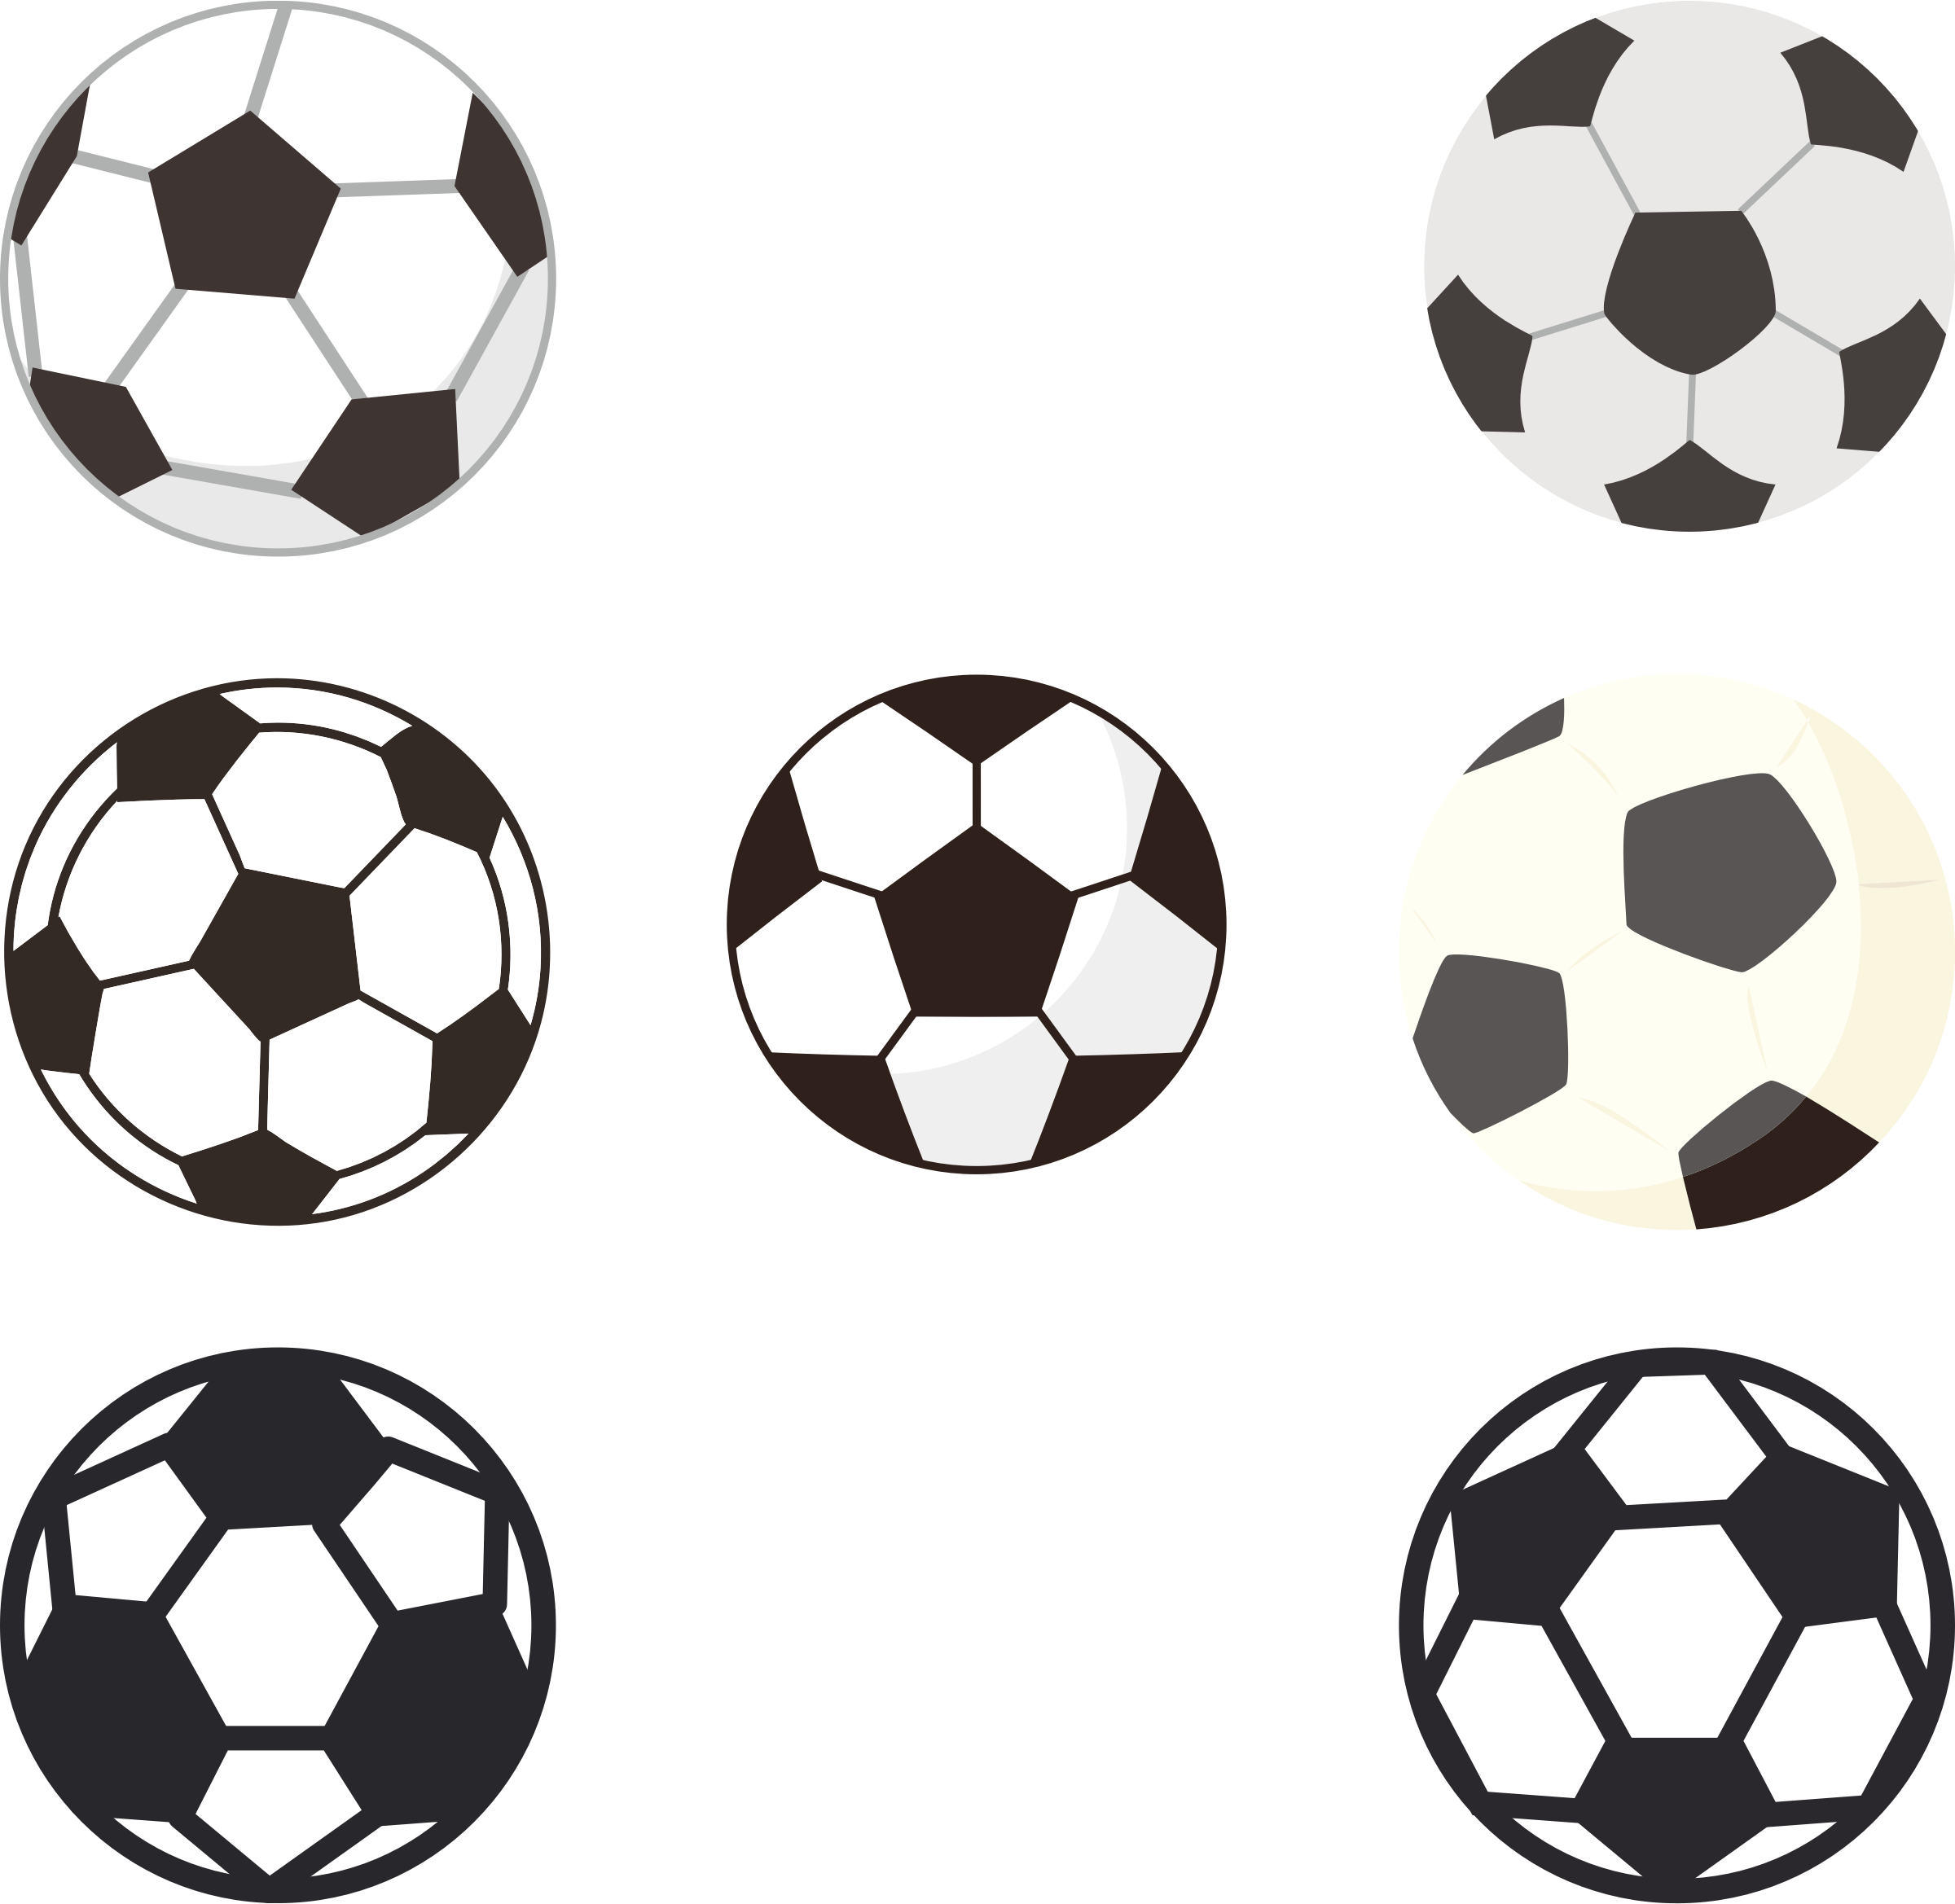 A Group Of Black And White Balls